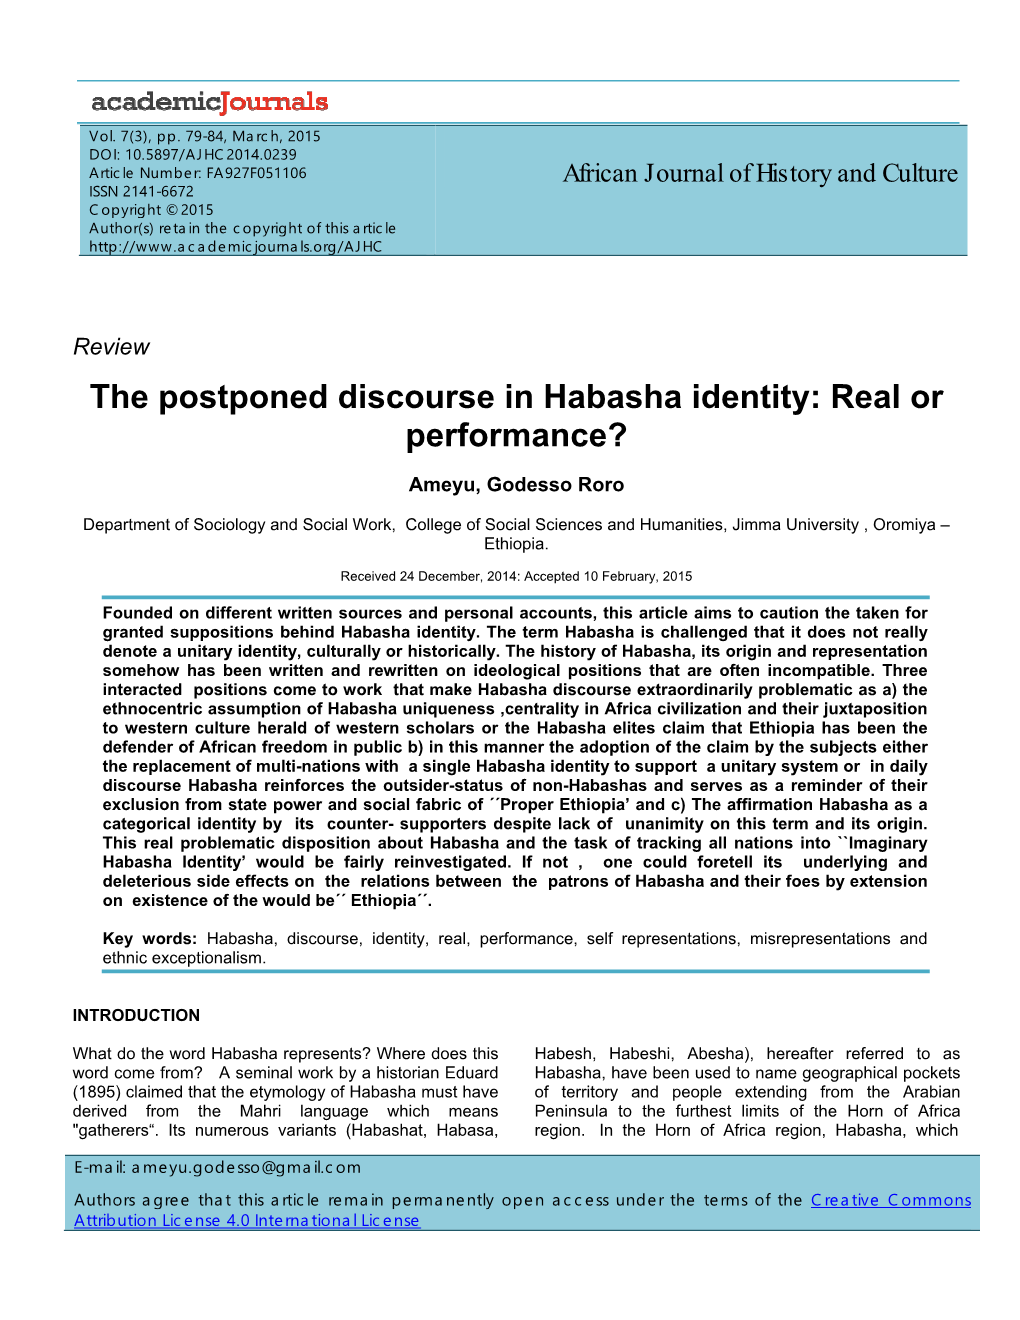 The Postponed Discourse in Habasha Identity: Real Or Performance?